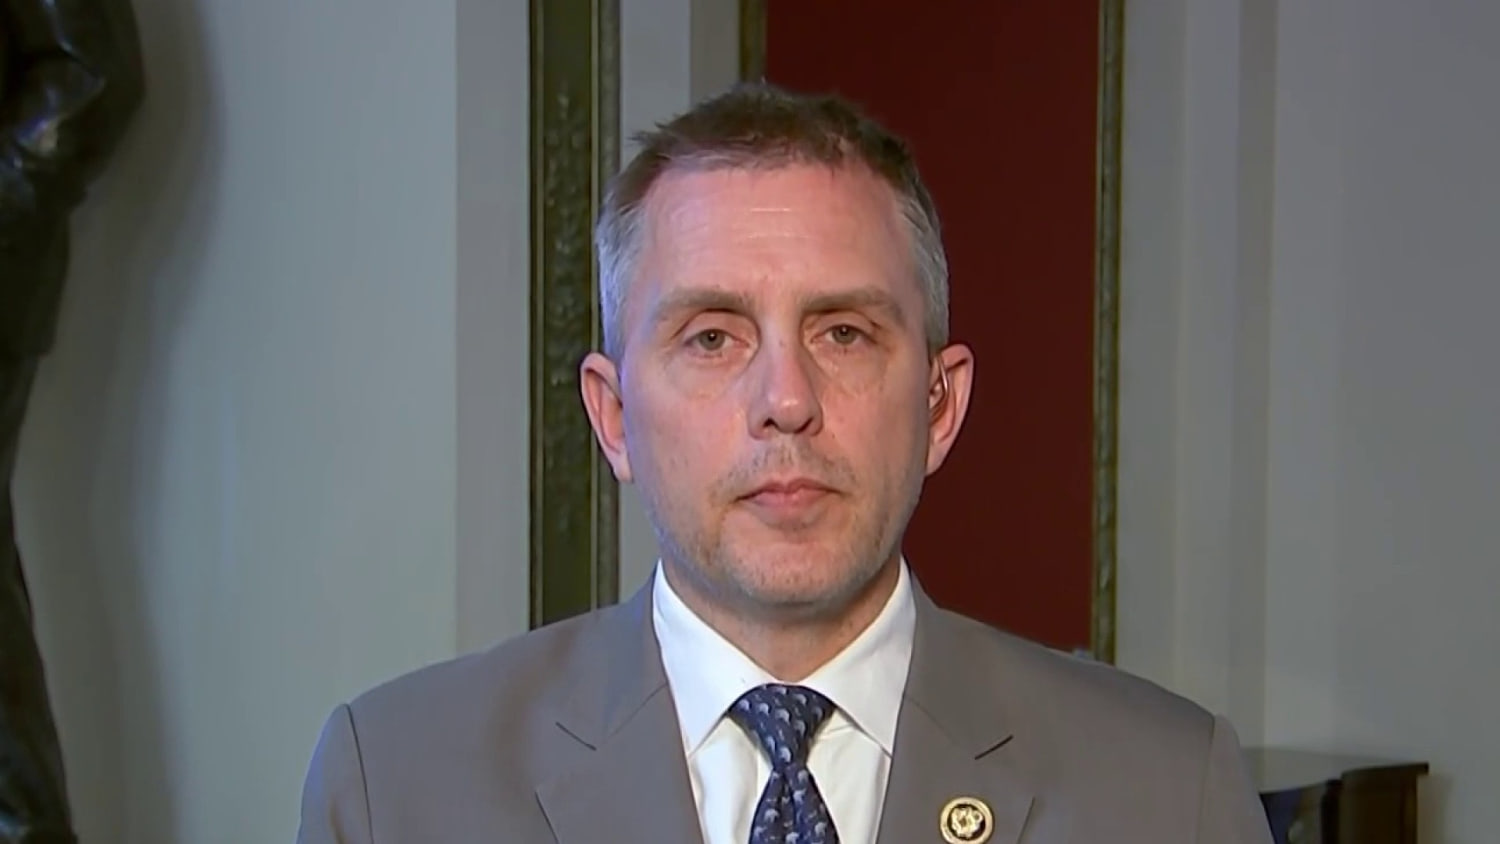 GOP Rep. Armstrong supports Speaker Johnson despite policy disagreements because ‘I’m a grown-up’